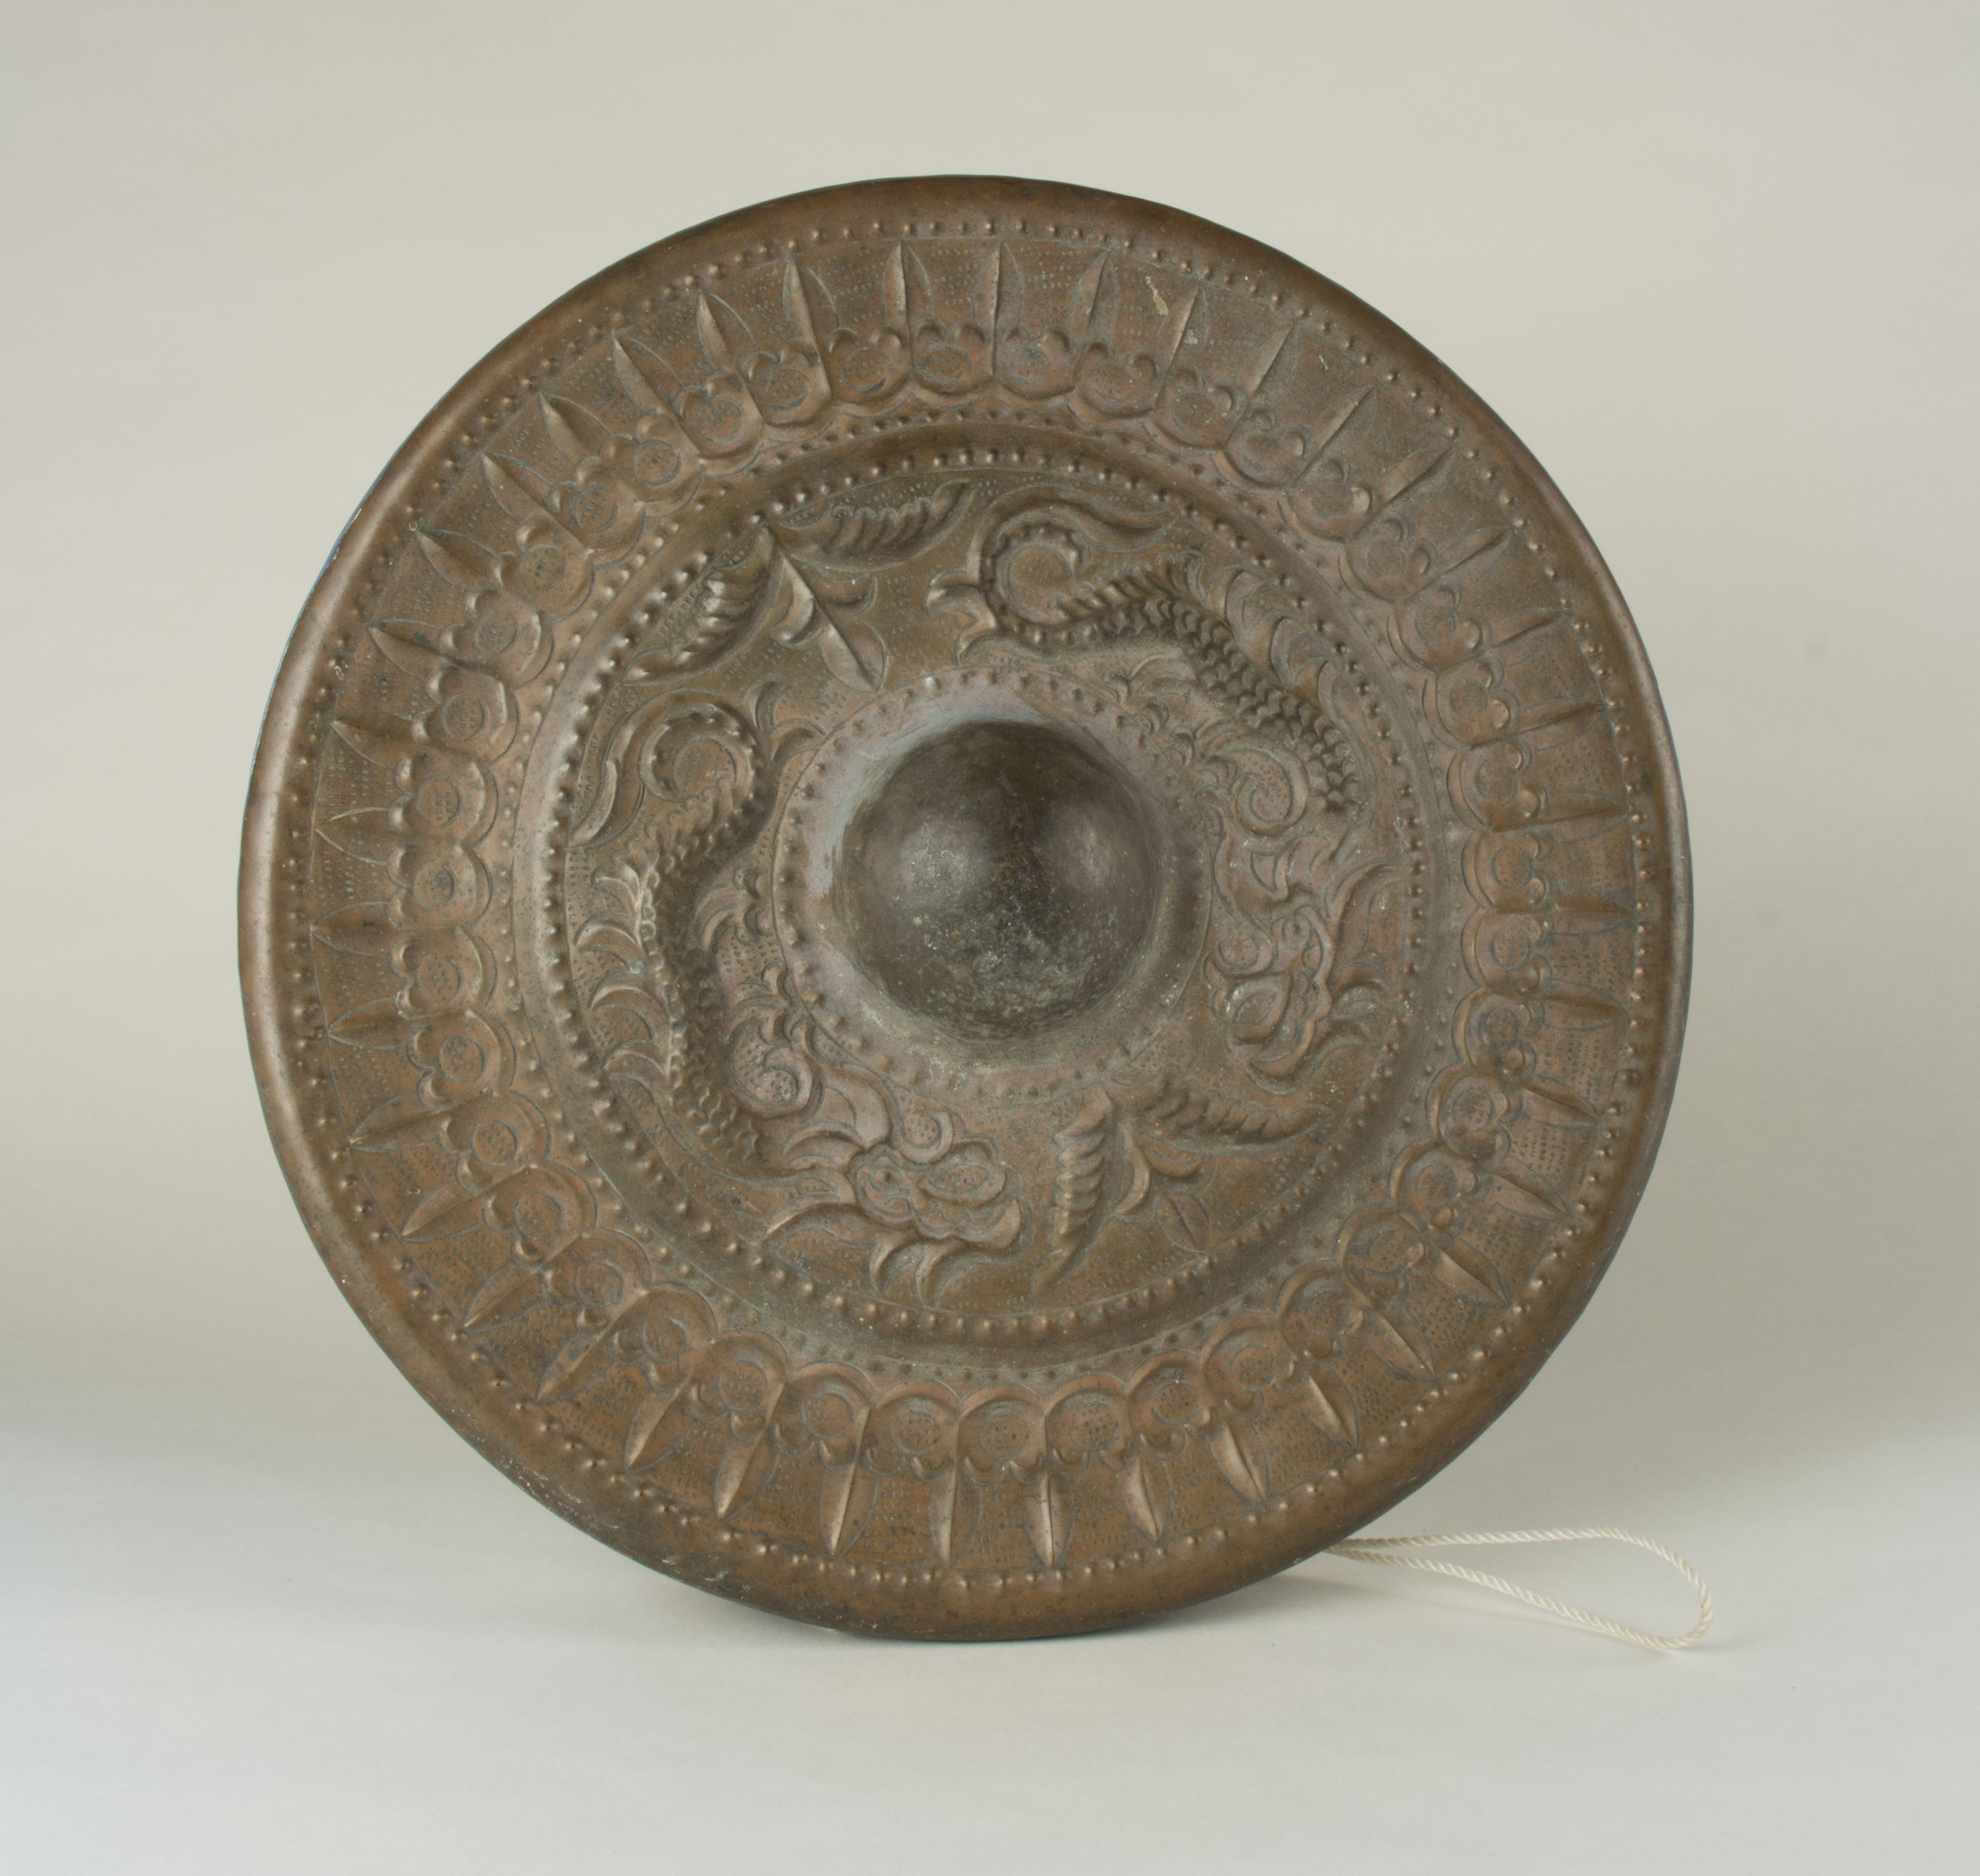 Gangsa bronze gong owned by Virginia B. Capulong- front view.Family heirloom from Abra, Northern Luzon. Any views, findings, conclusions, or recommendations expressed in this story do not necessarily represent those of the National Endowment for the Humanities. 